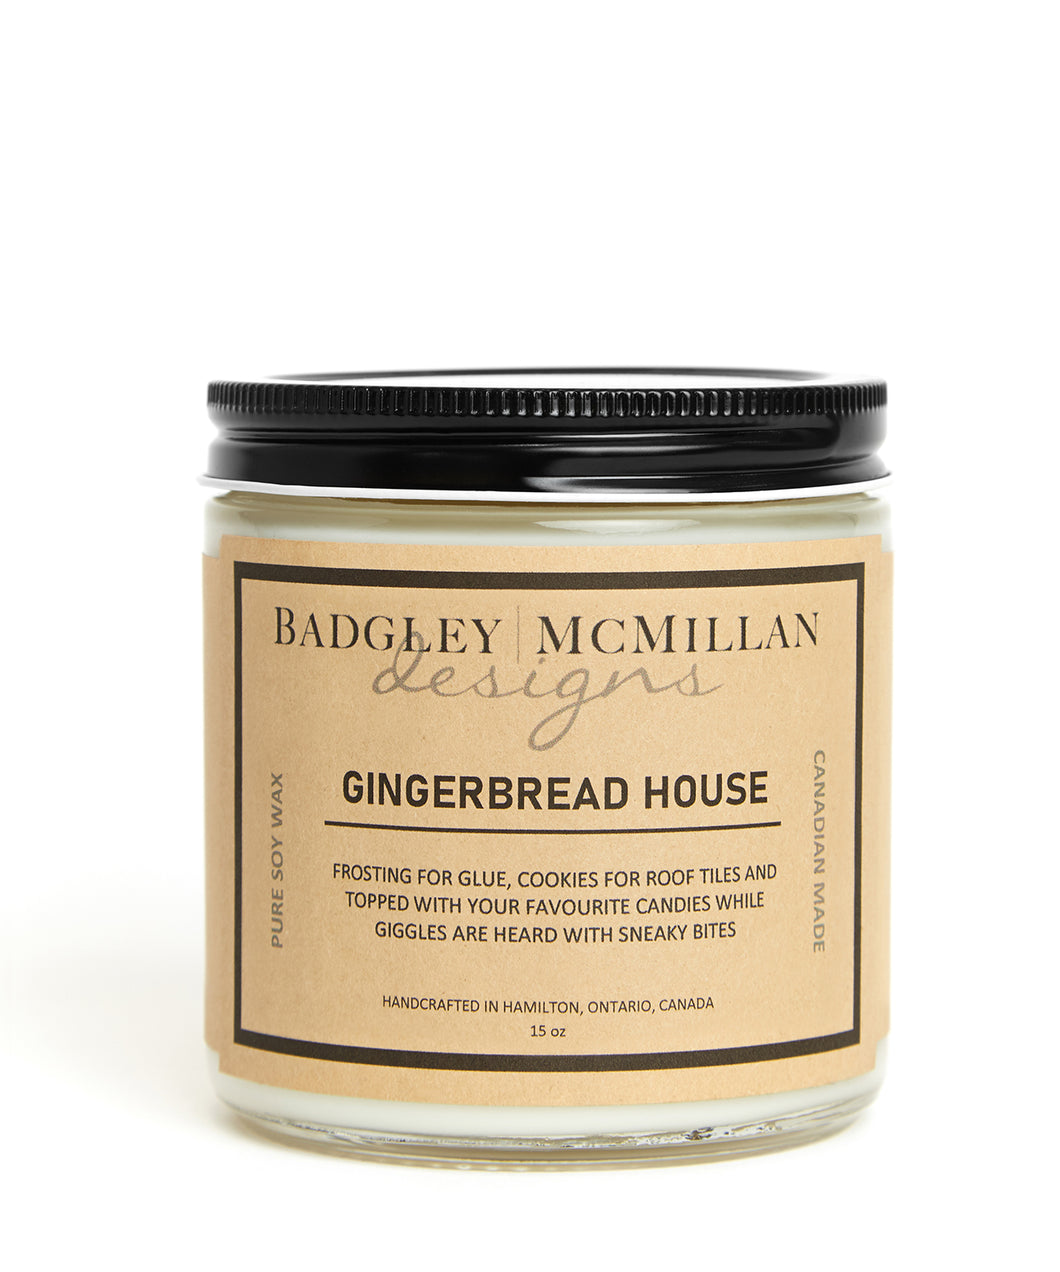 Gingerbread House 15 oz Soy Jar Candle